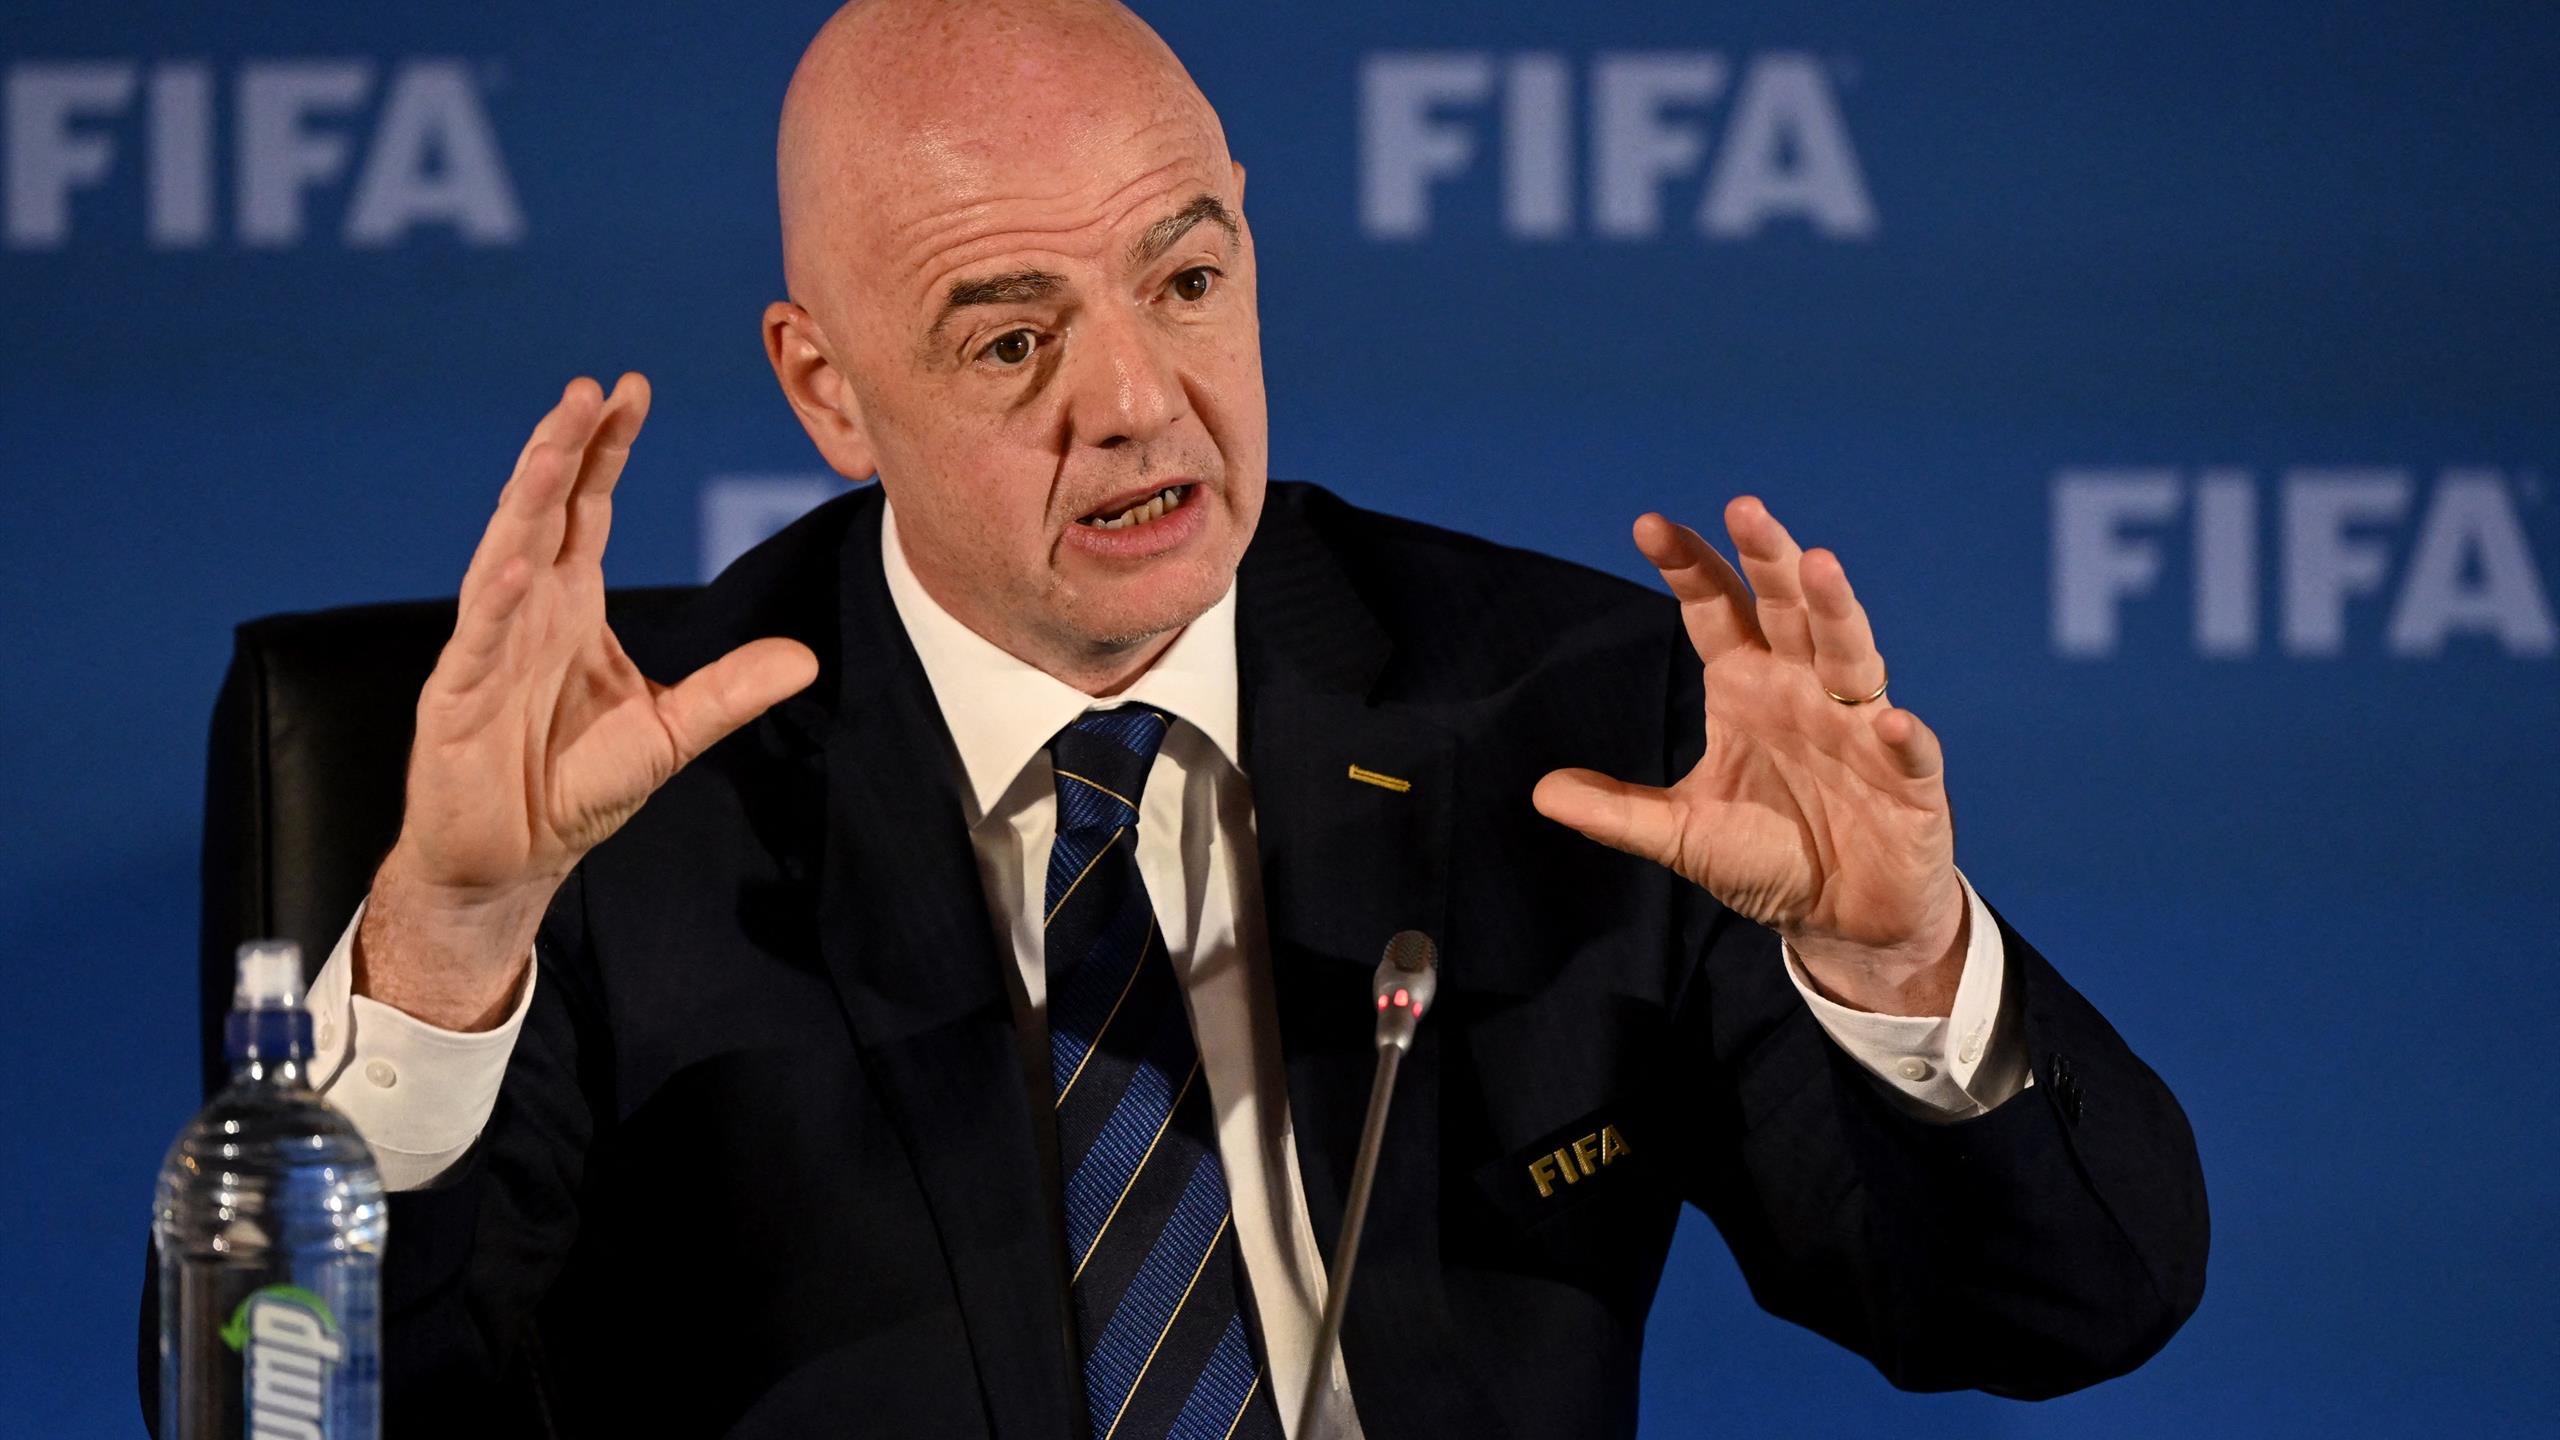 Qatar 2022 |  FIFA President Infantino wants a ceasefire in Ukraine during the World Cup